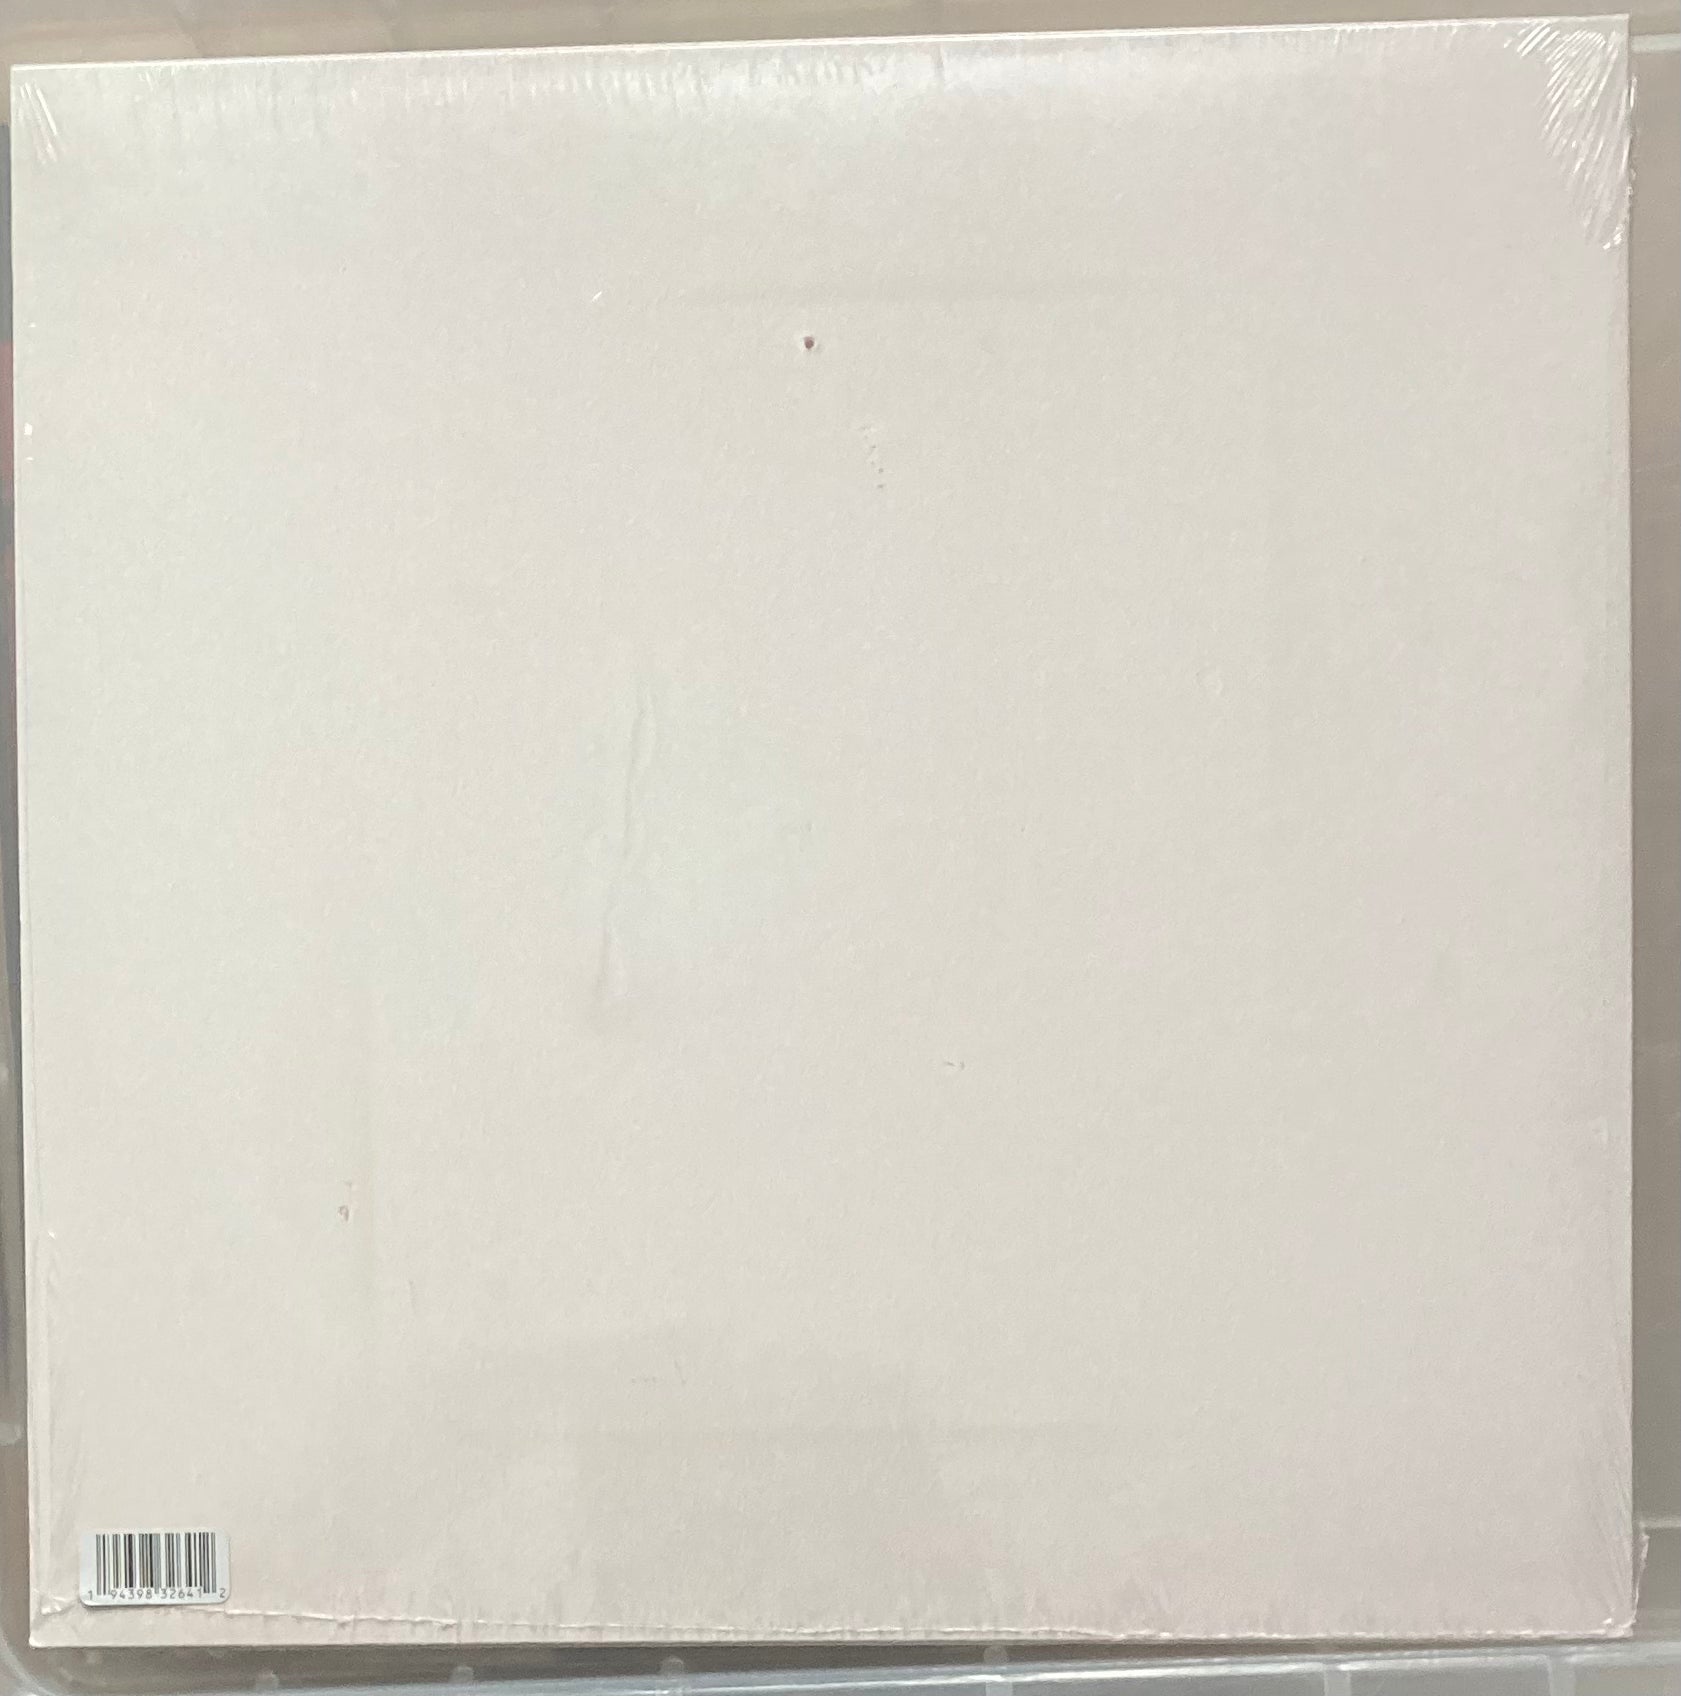 The back of 'Arcade Fire - Her' on vinyl